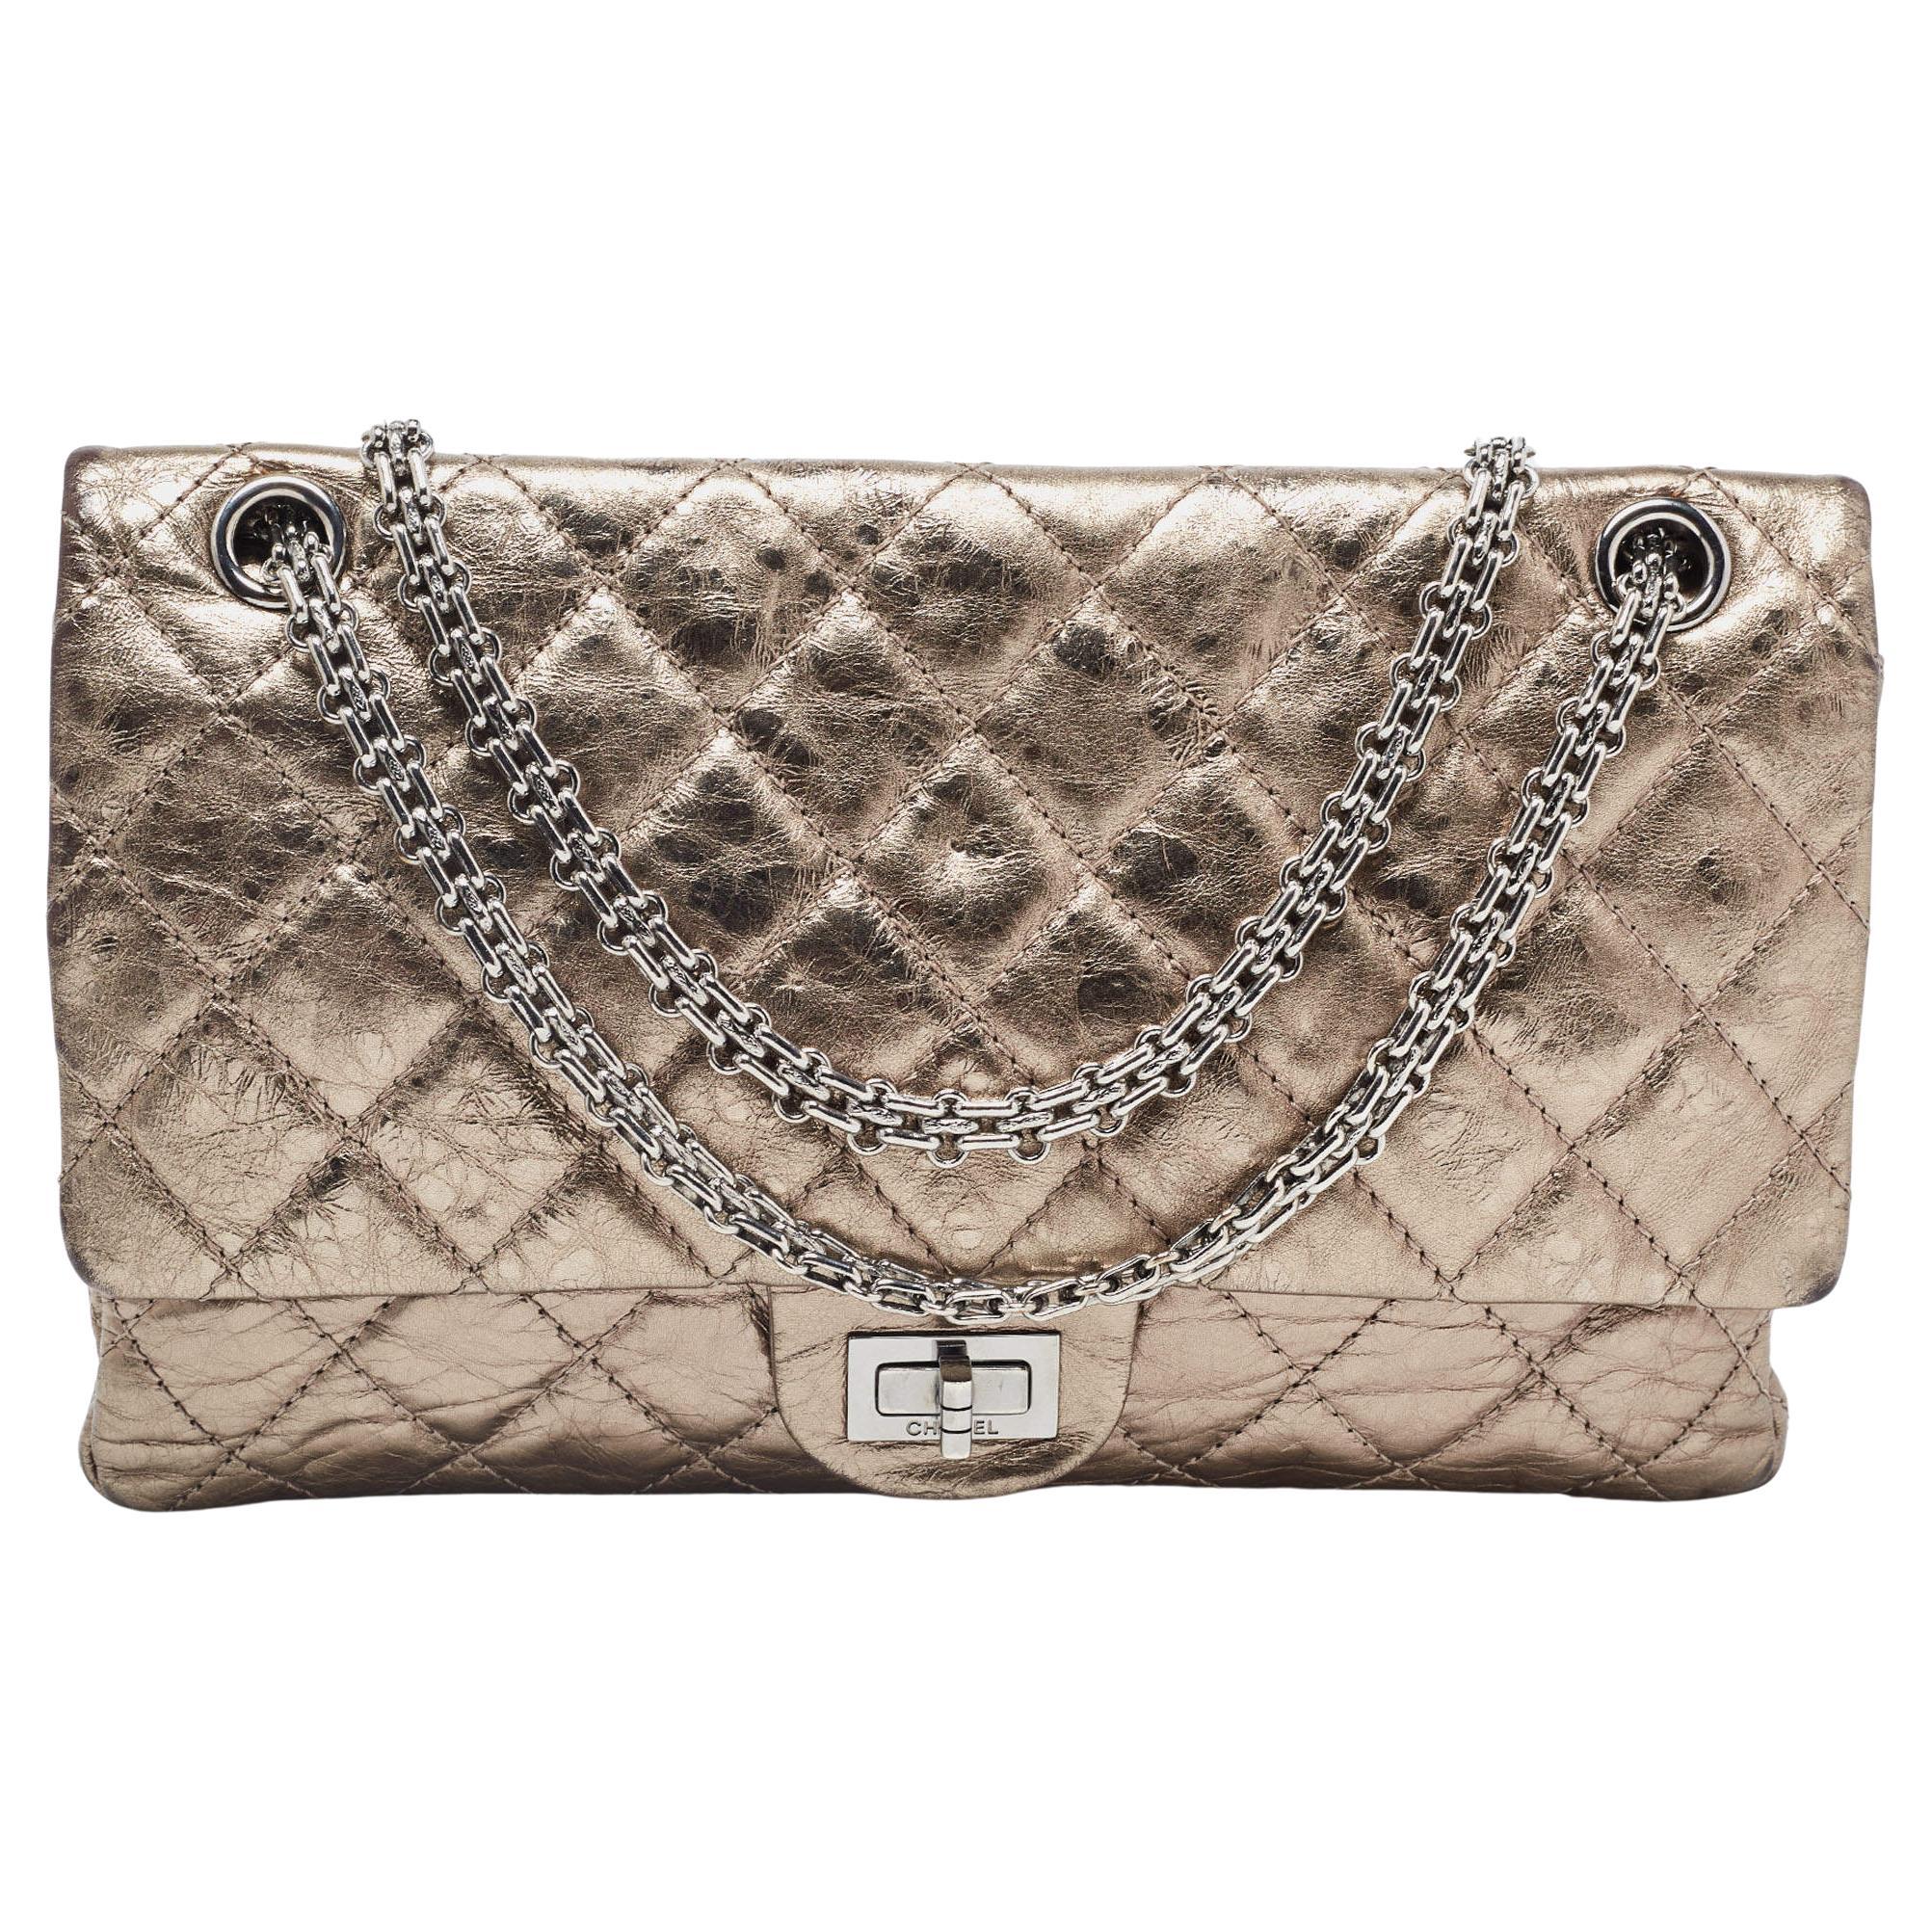 Chanel Metallic Quilted Aged Leather Reissue 2.55 Classic 226 Flap Bag